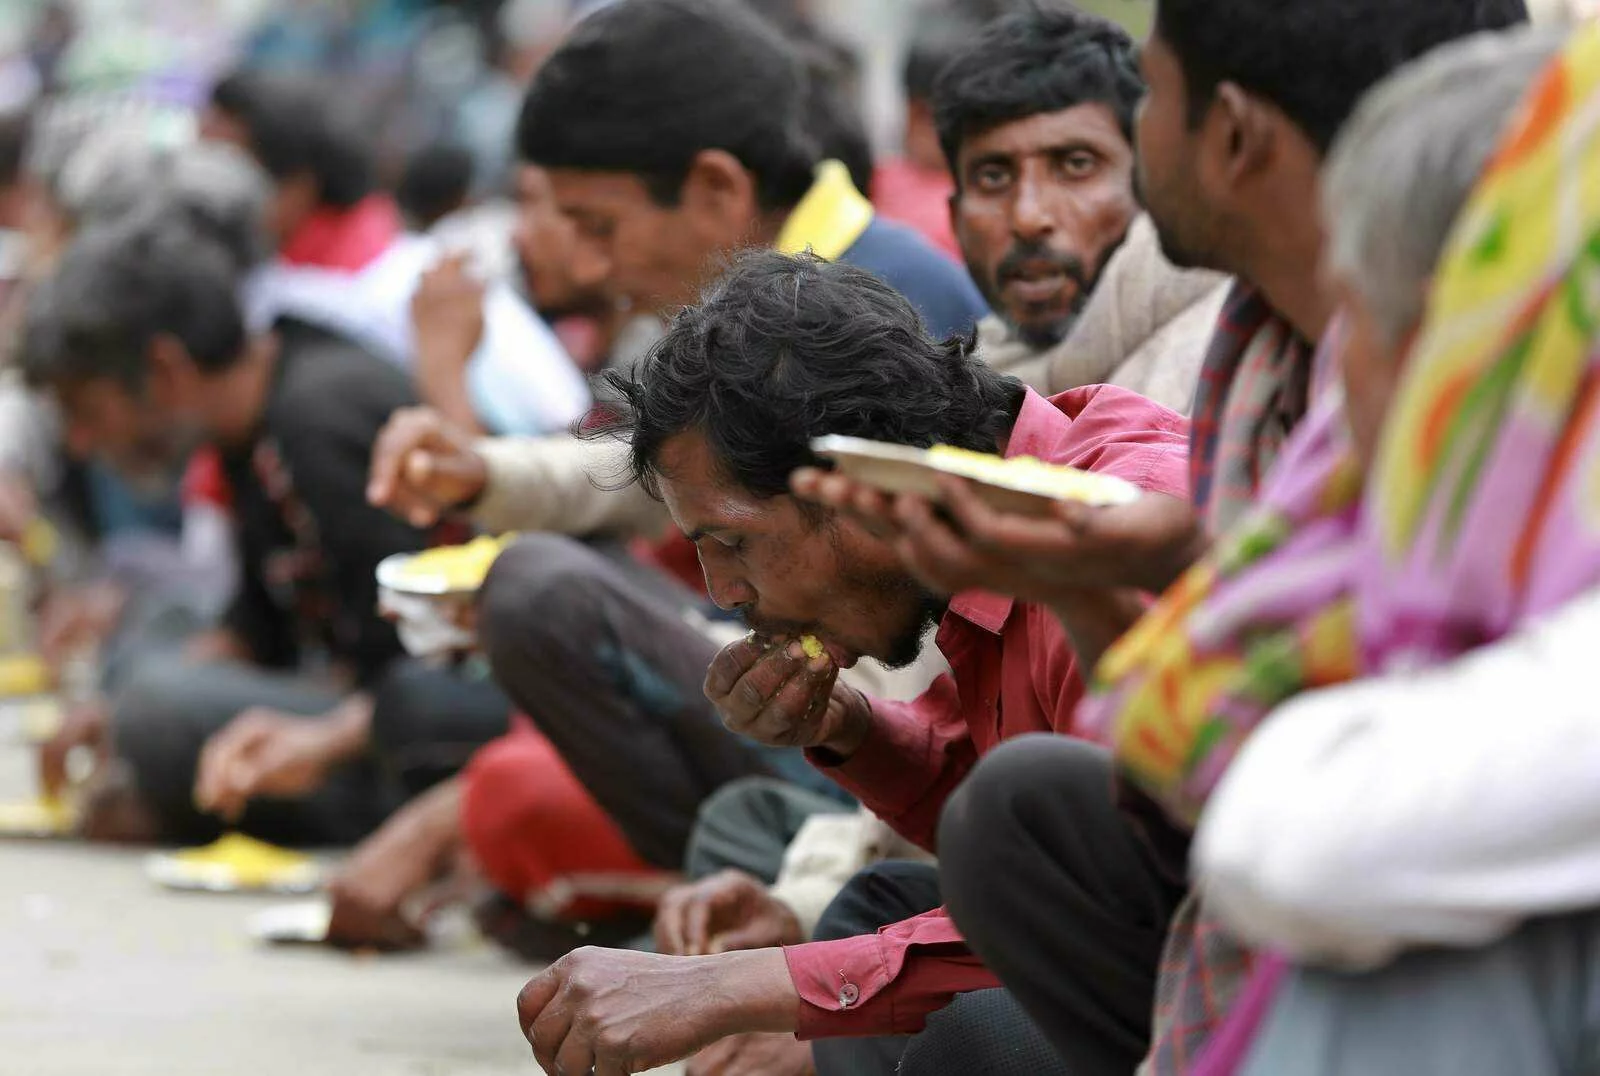 Jobless after virus lockdown, India's poor struggle to eat